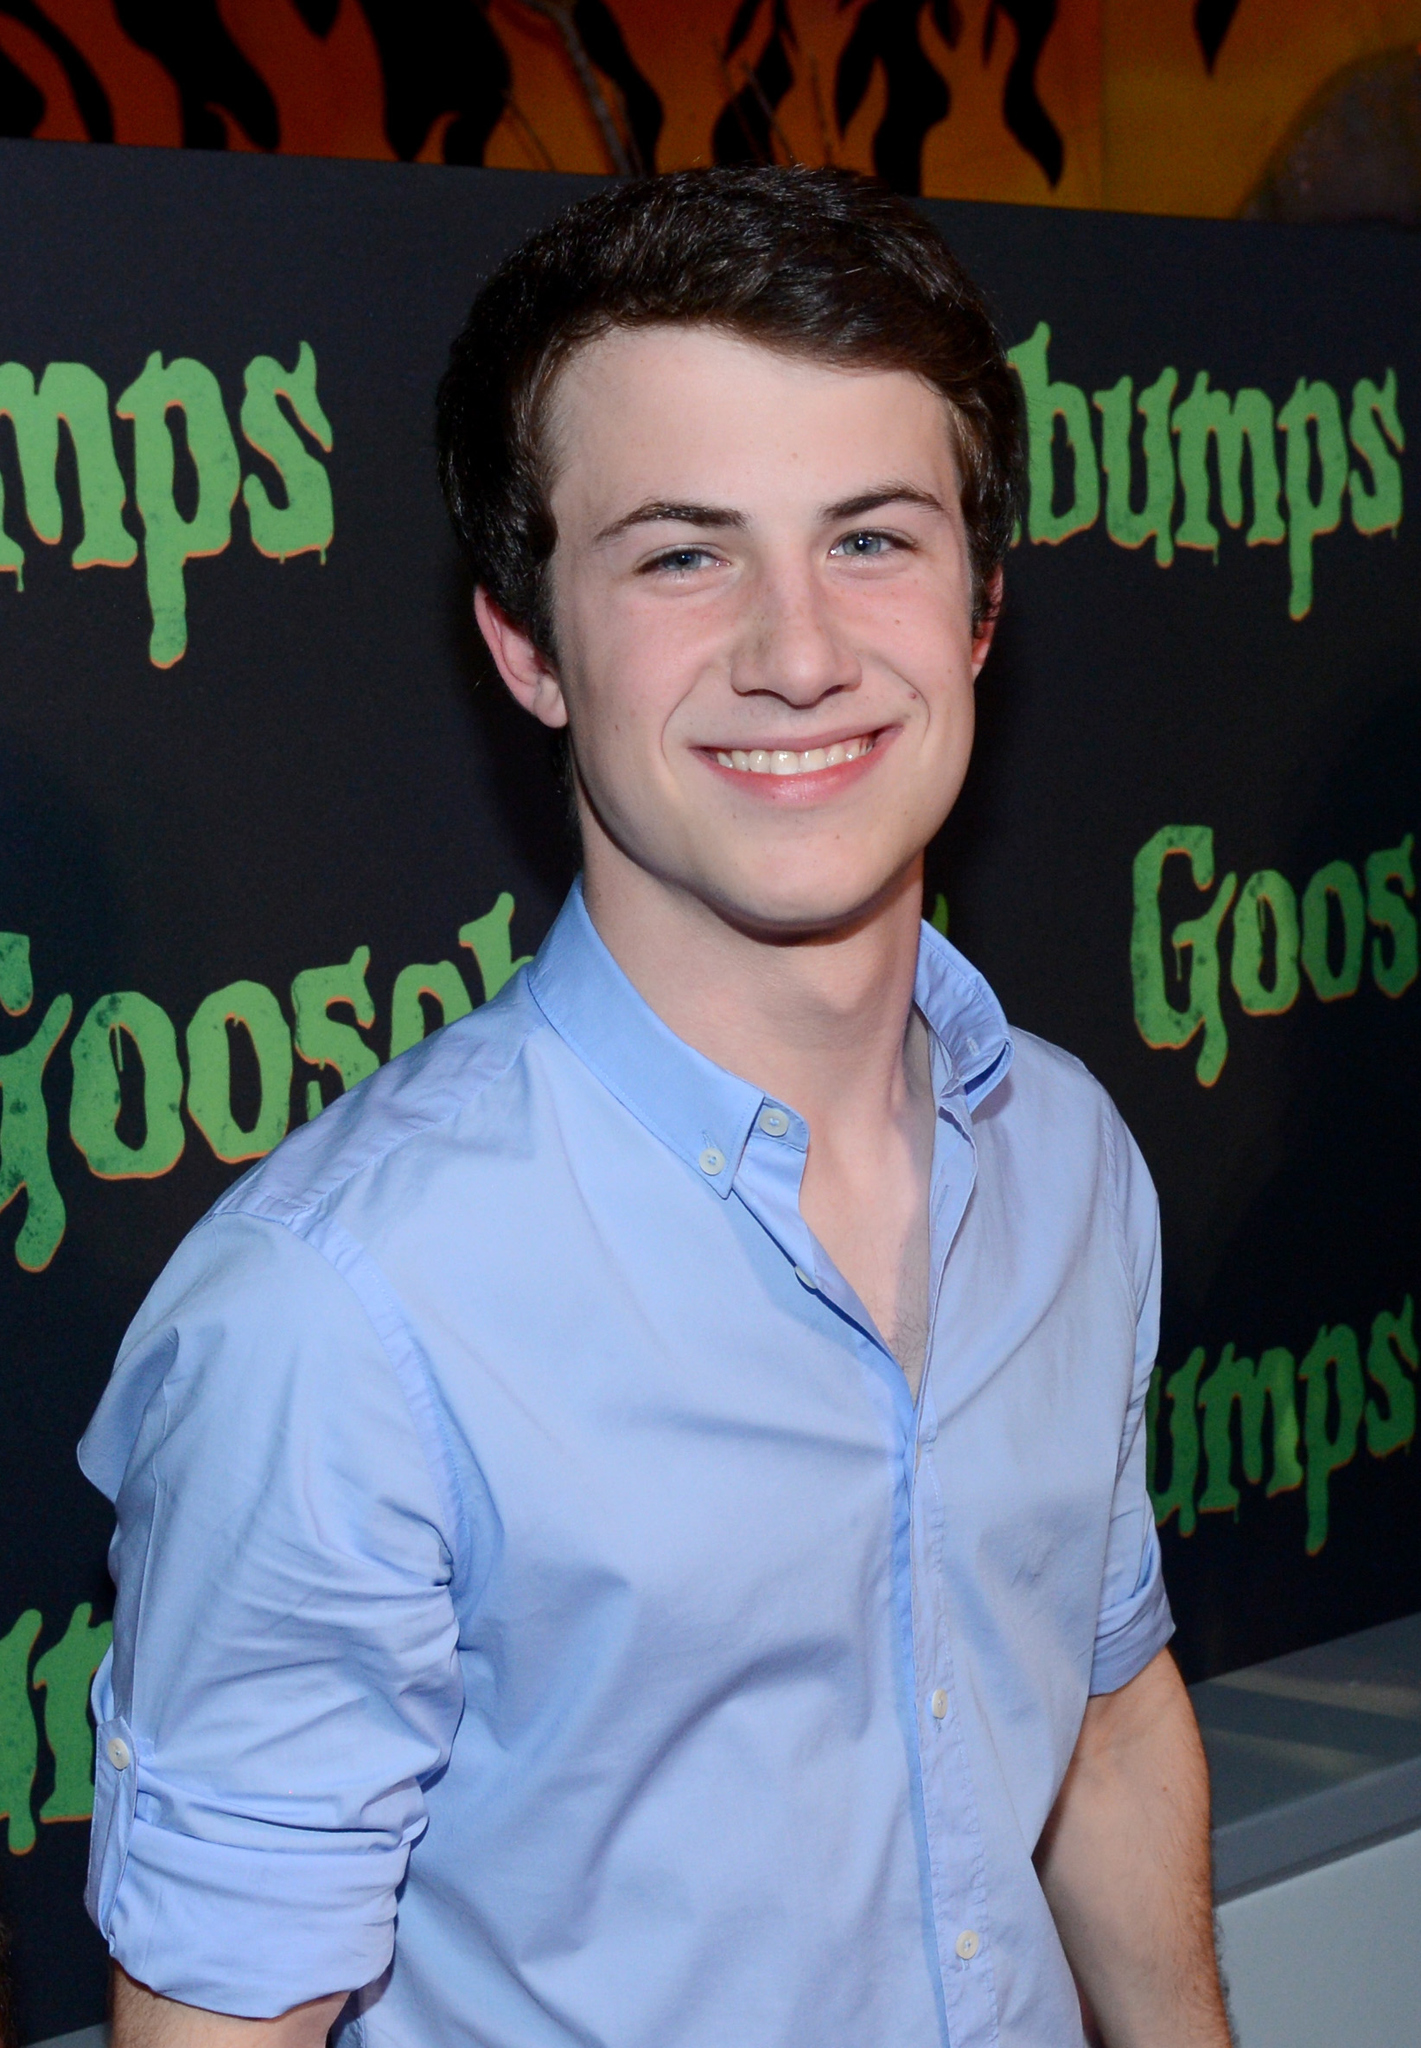 Andrew Goodman and Dylan Minnette at event of Goosebumps (2015)